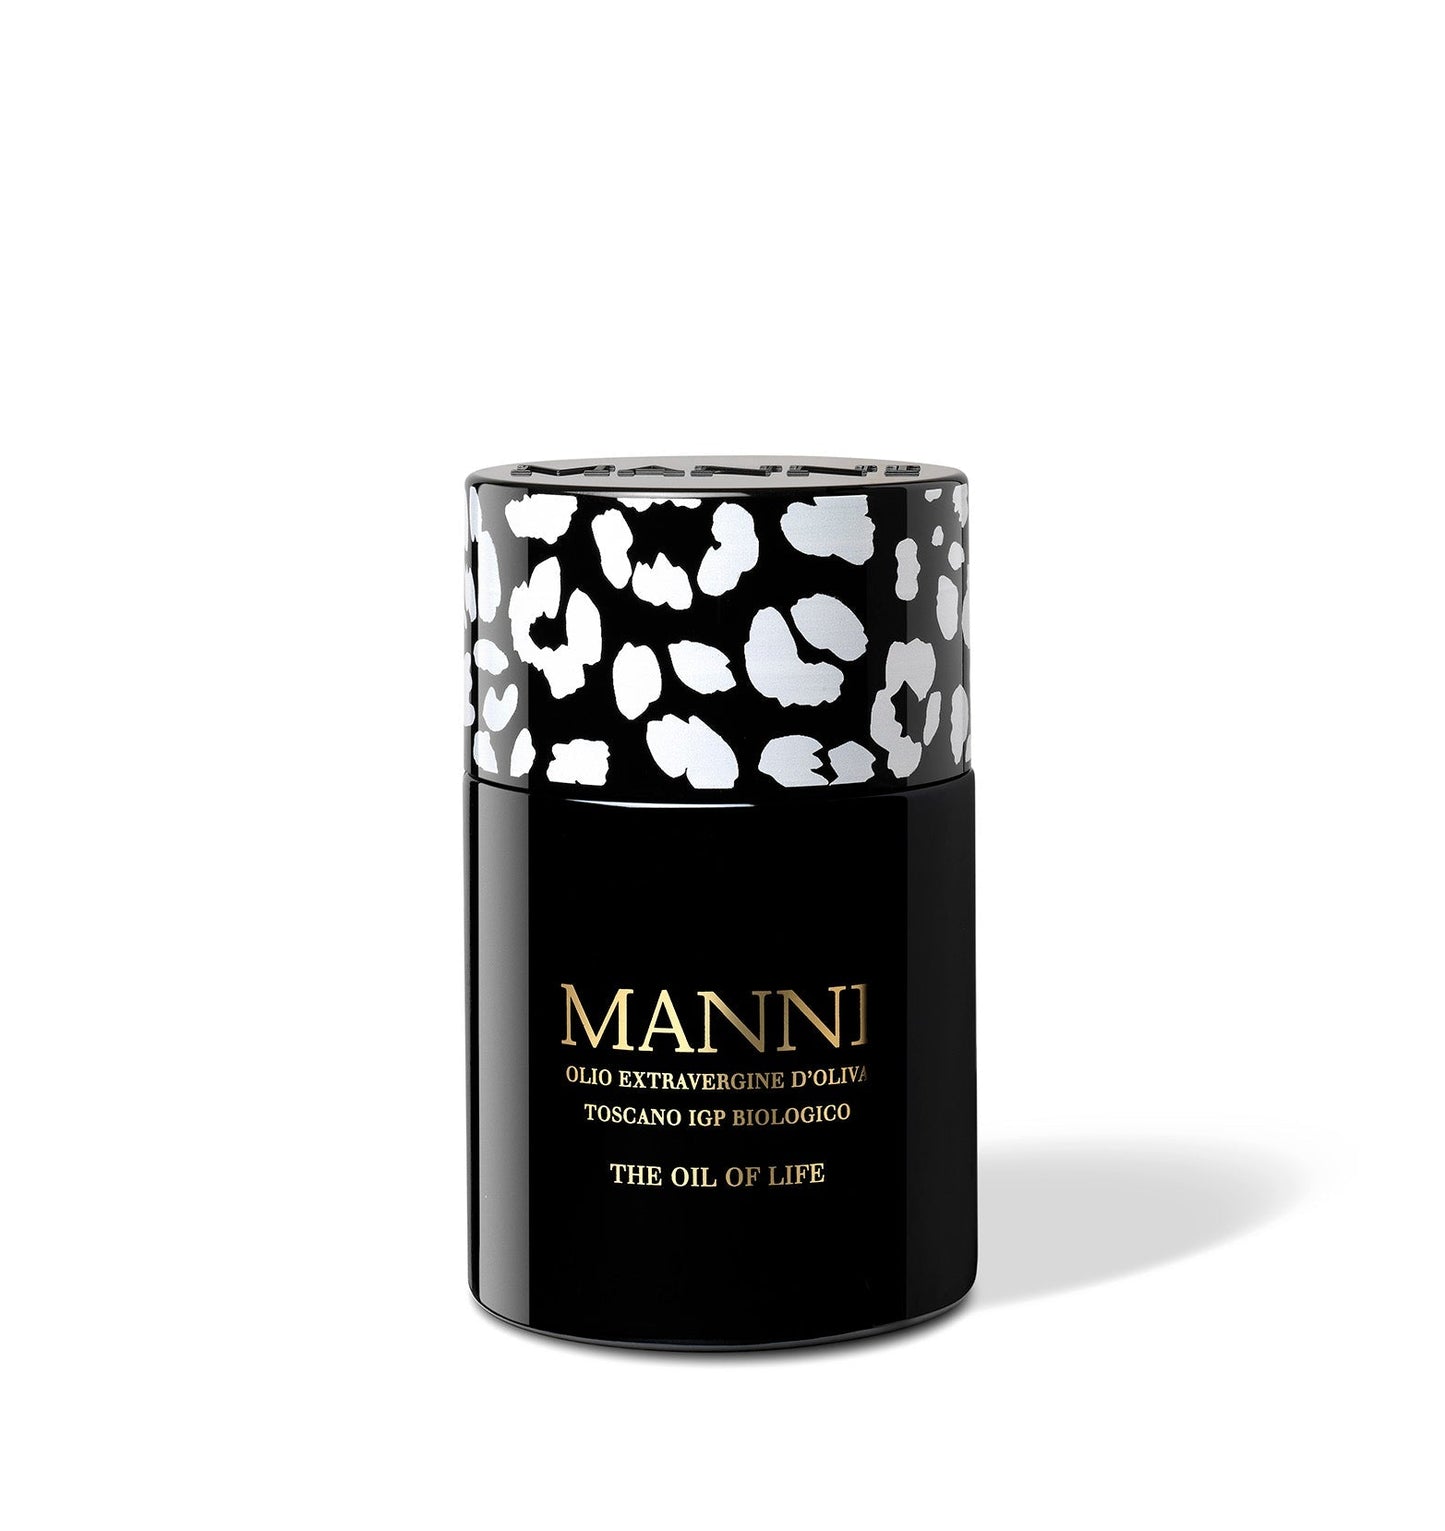 Manni Oil of life organic extra virgin olive oil - leopard